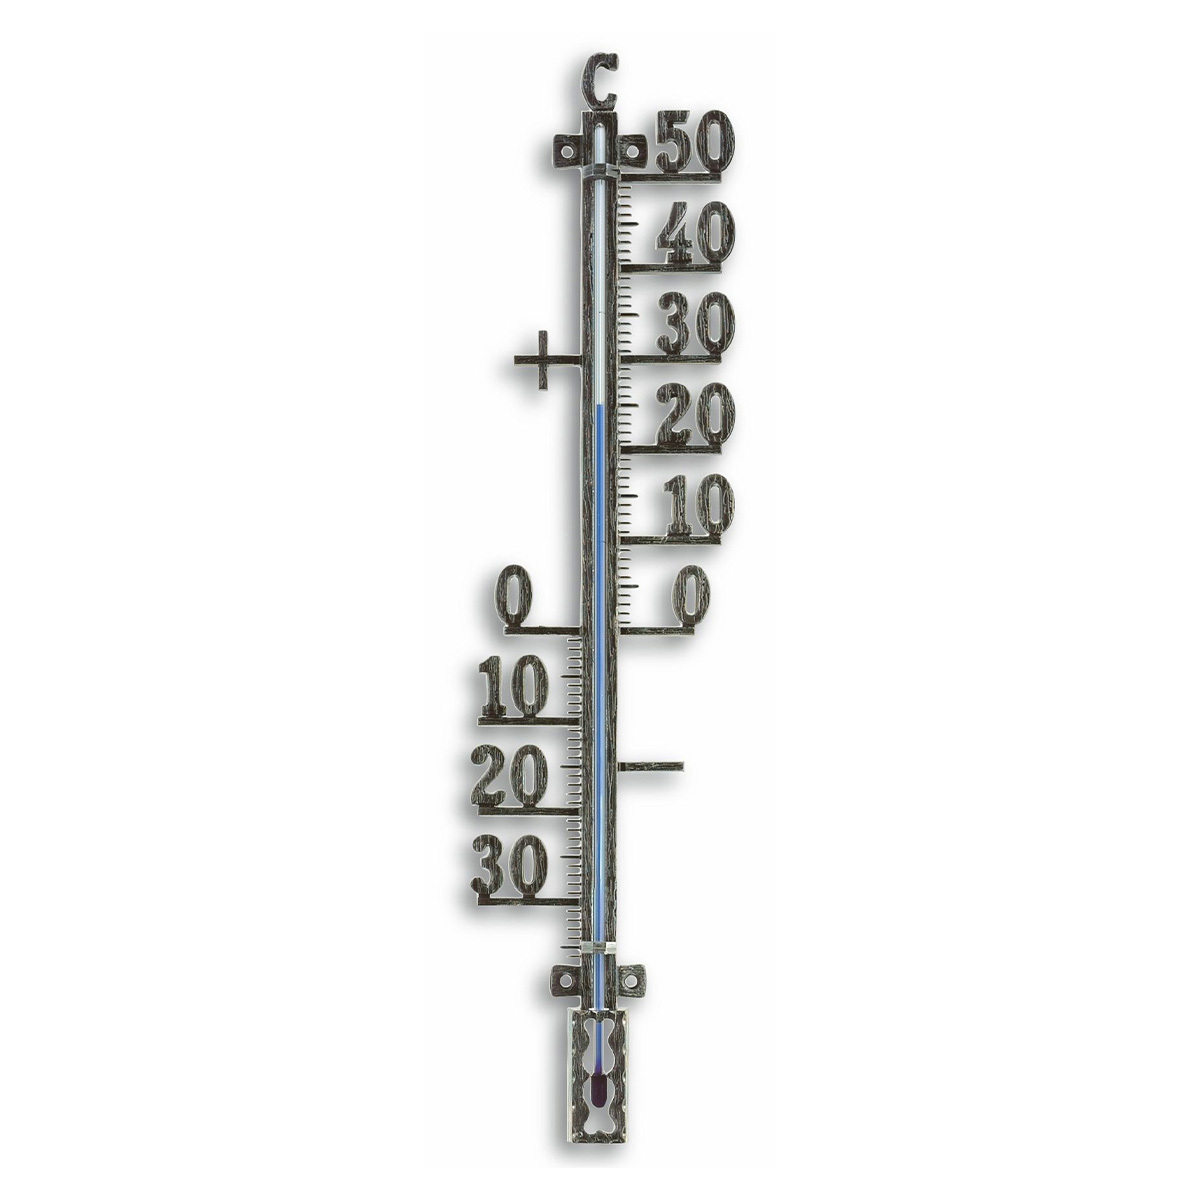 12-5002-50-analoges-aussenthermometer-metall-1200x1200px.jpg